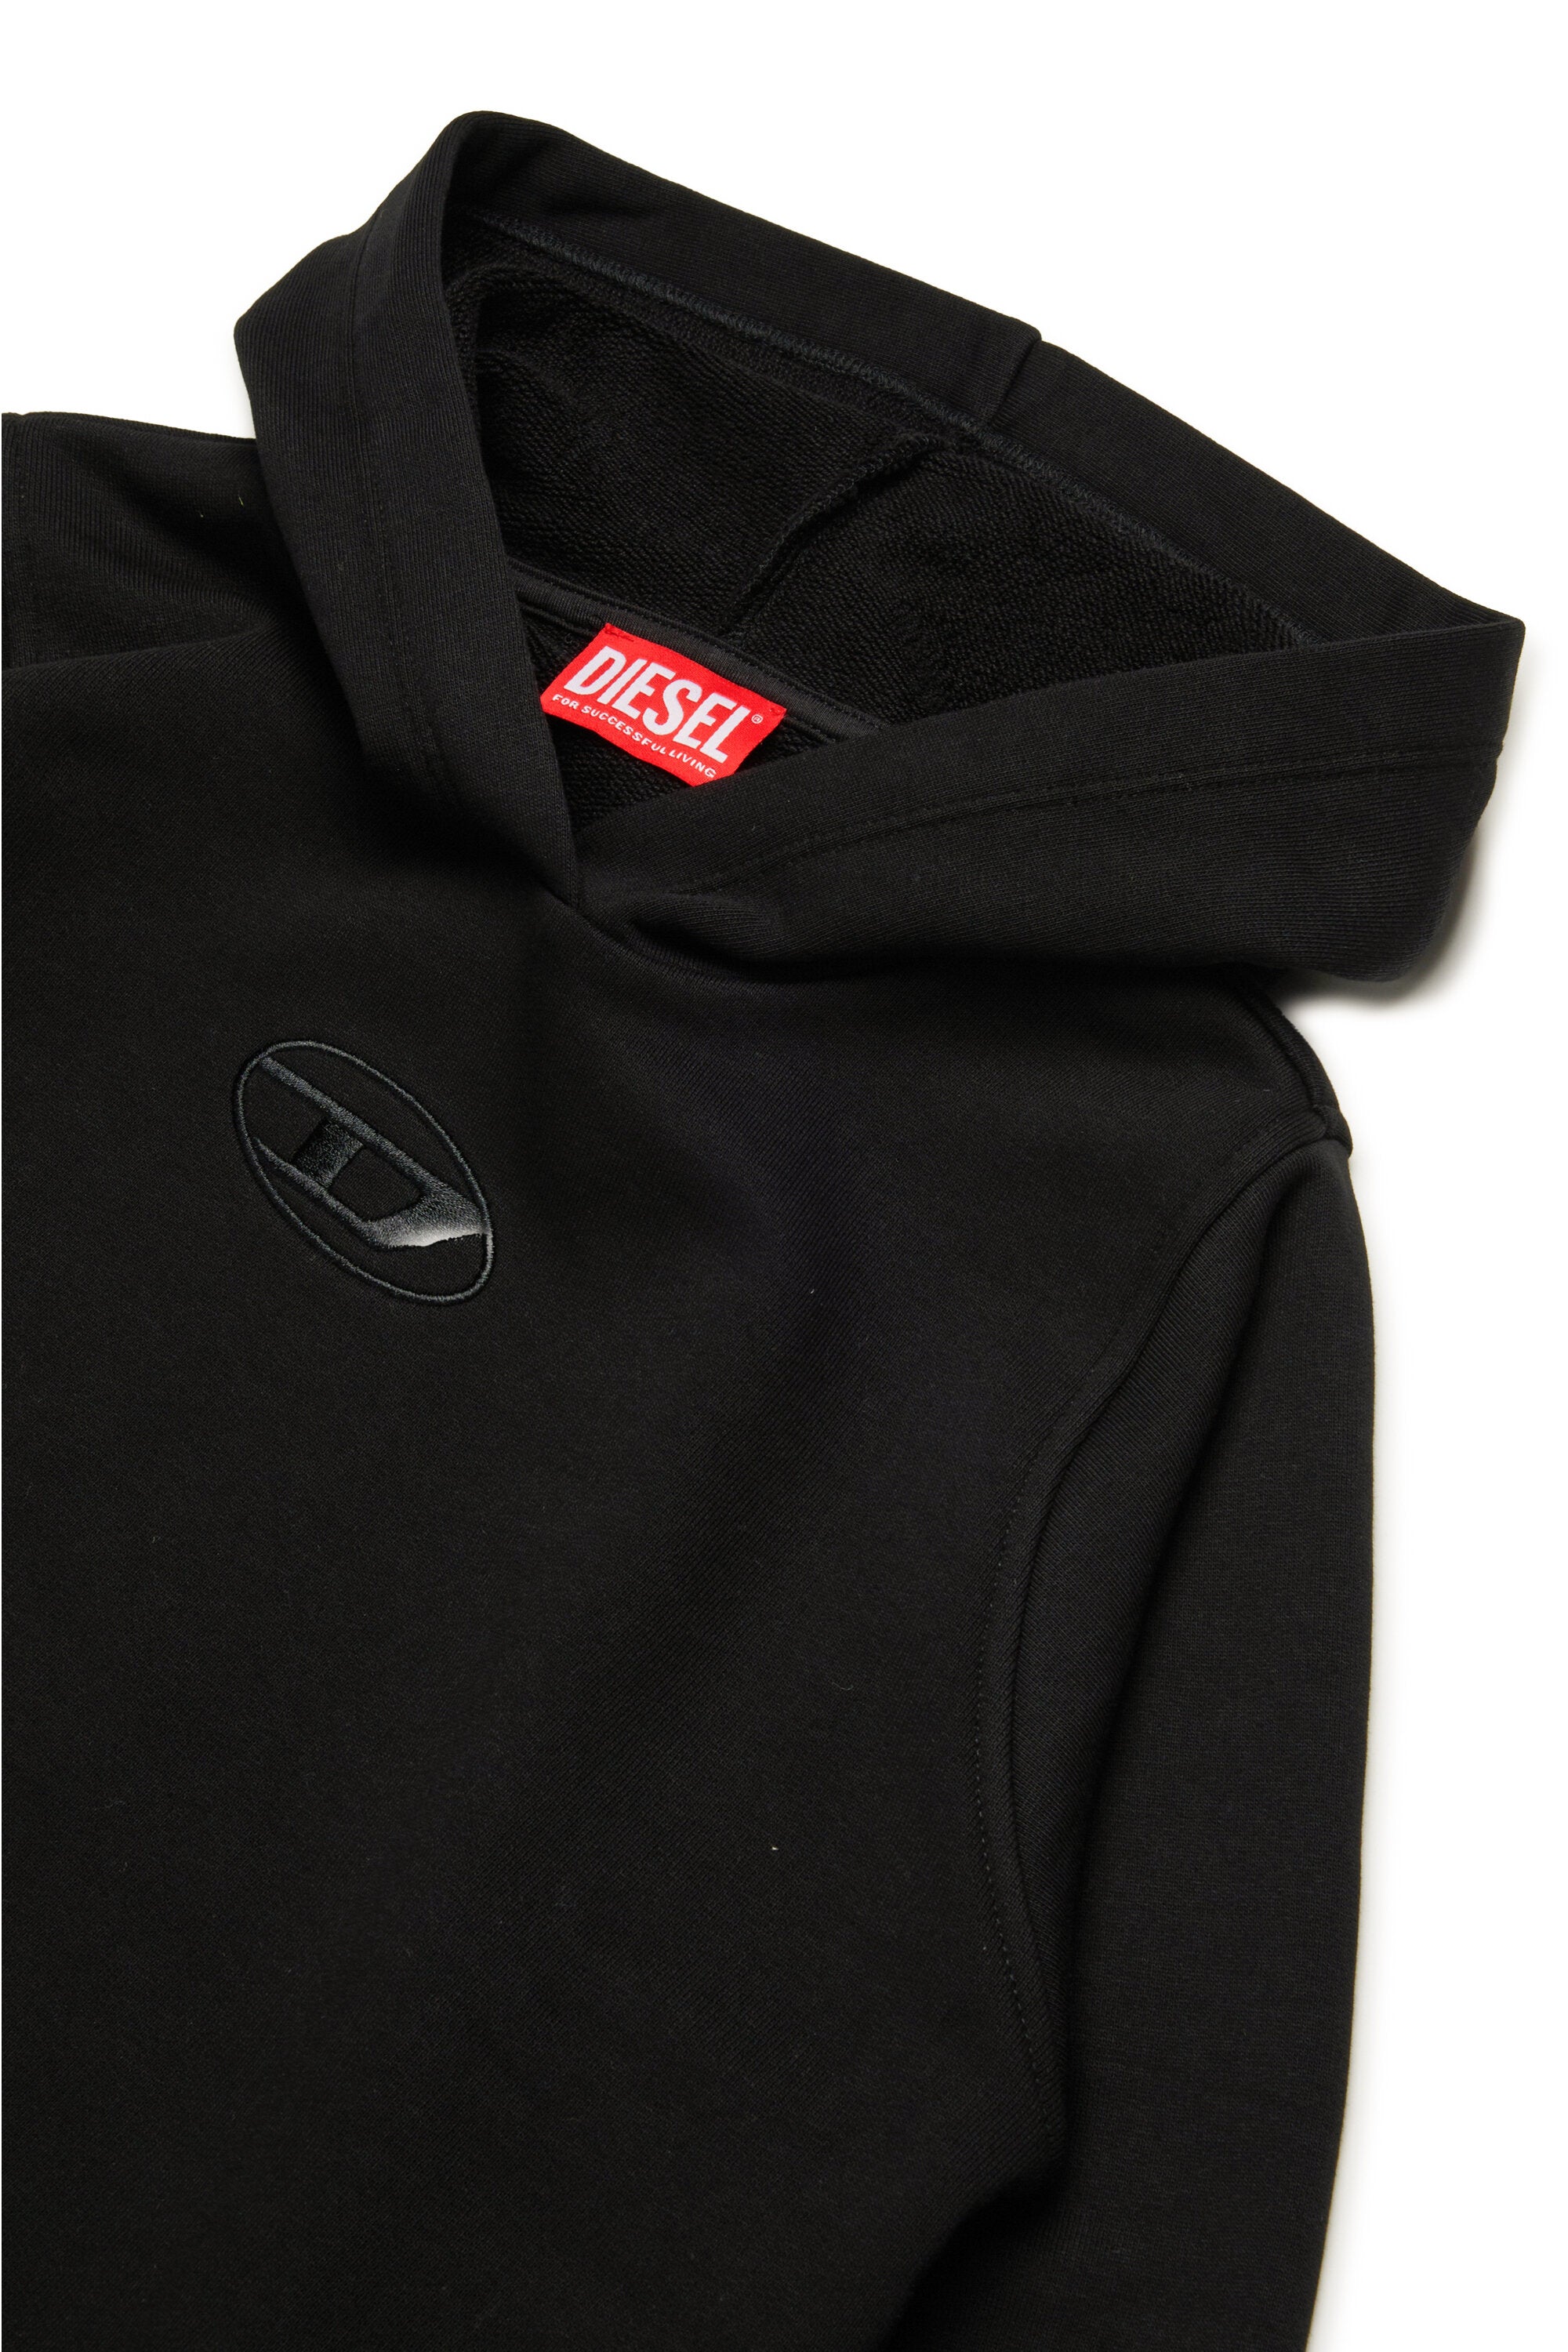 Hooded sweatshirt with embroidered oval D logo